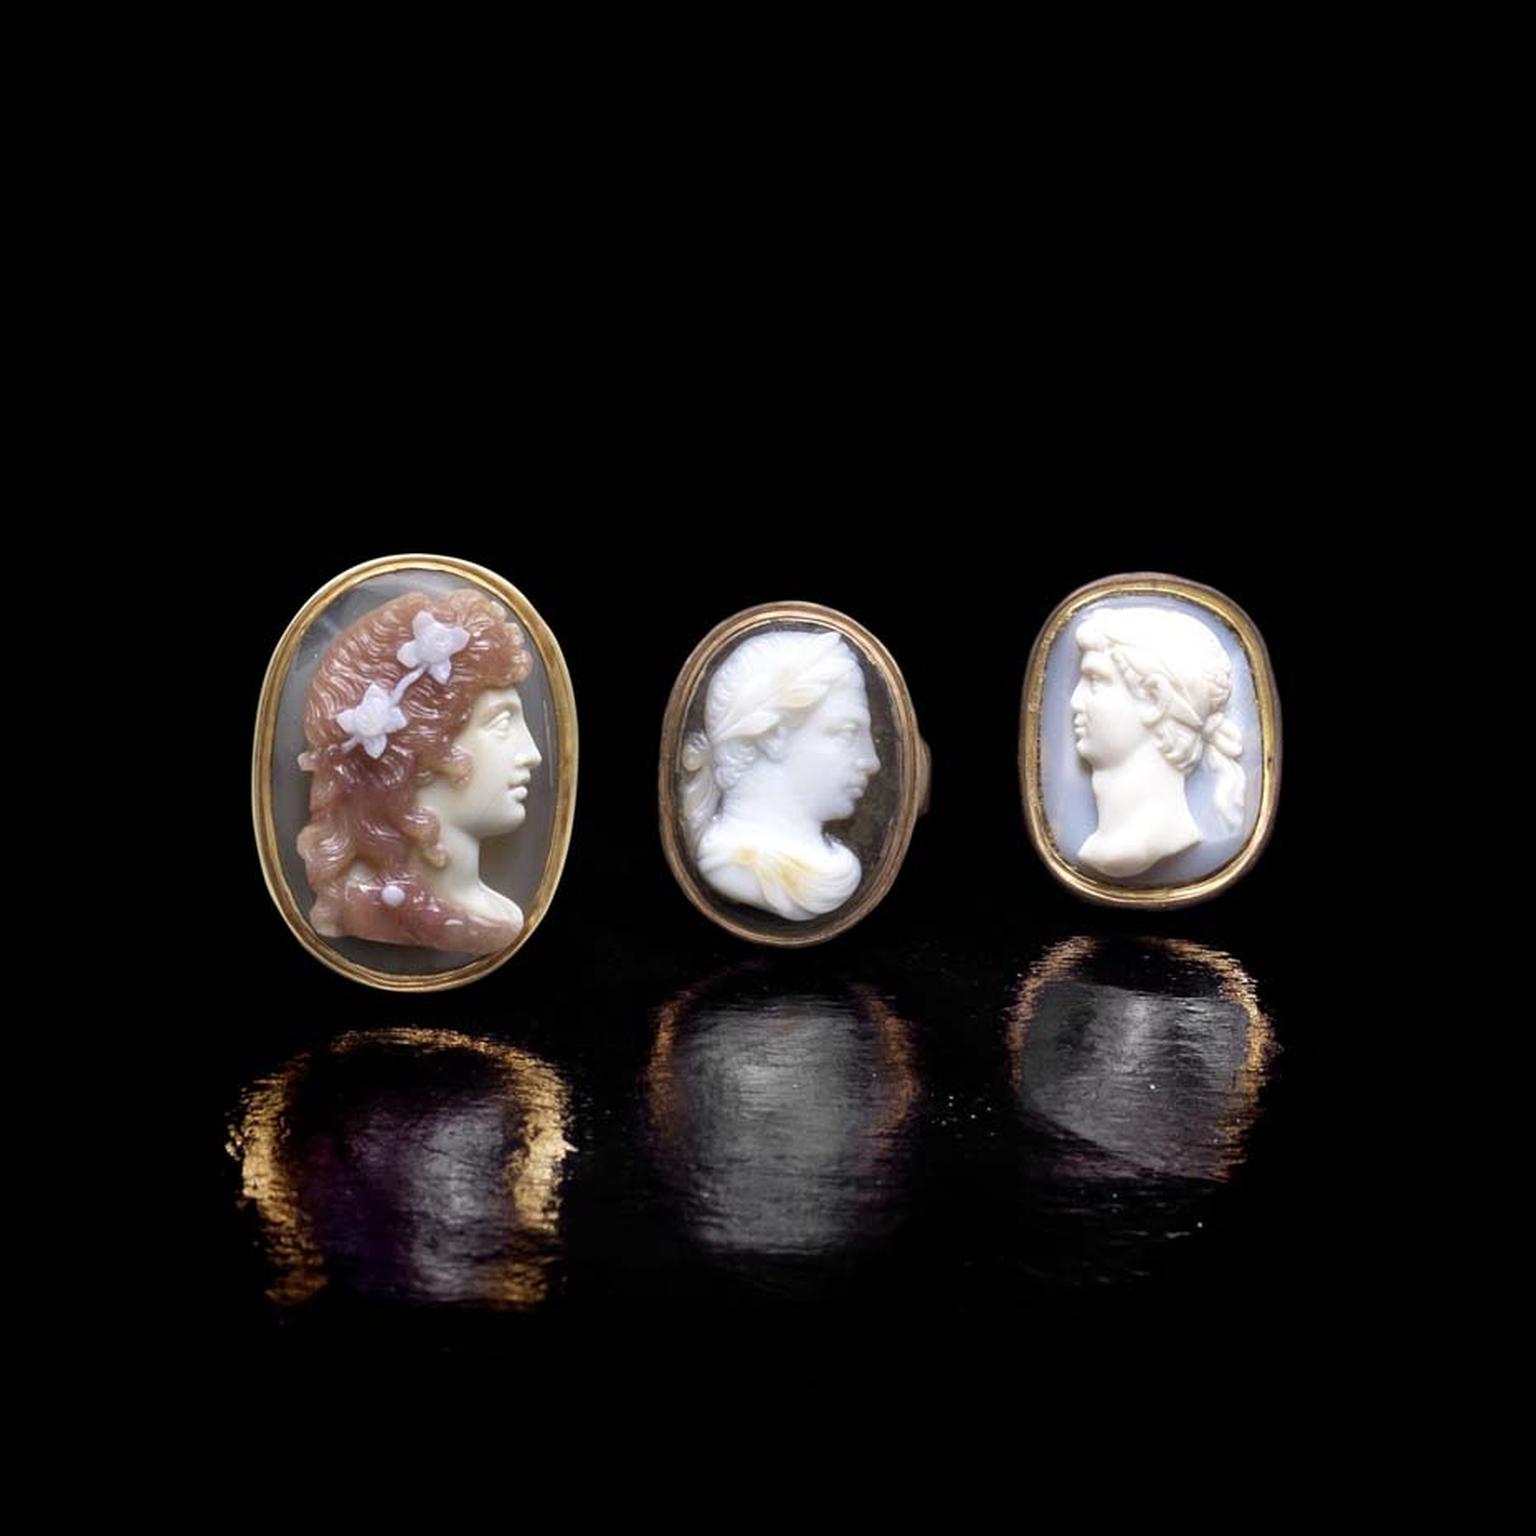 All 101 of the cameos and intaglios in the Ceres Collection have been mounted into rings, making them extremely wearable pieces of jewellery as well as items of historical importance.